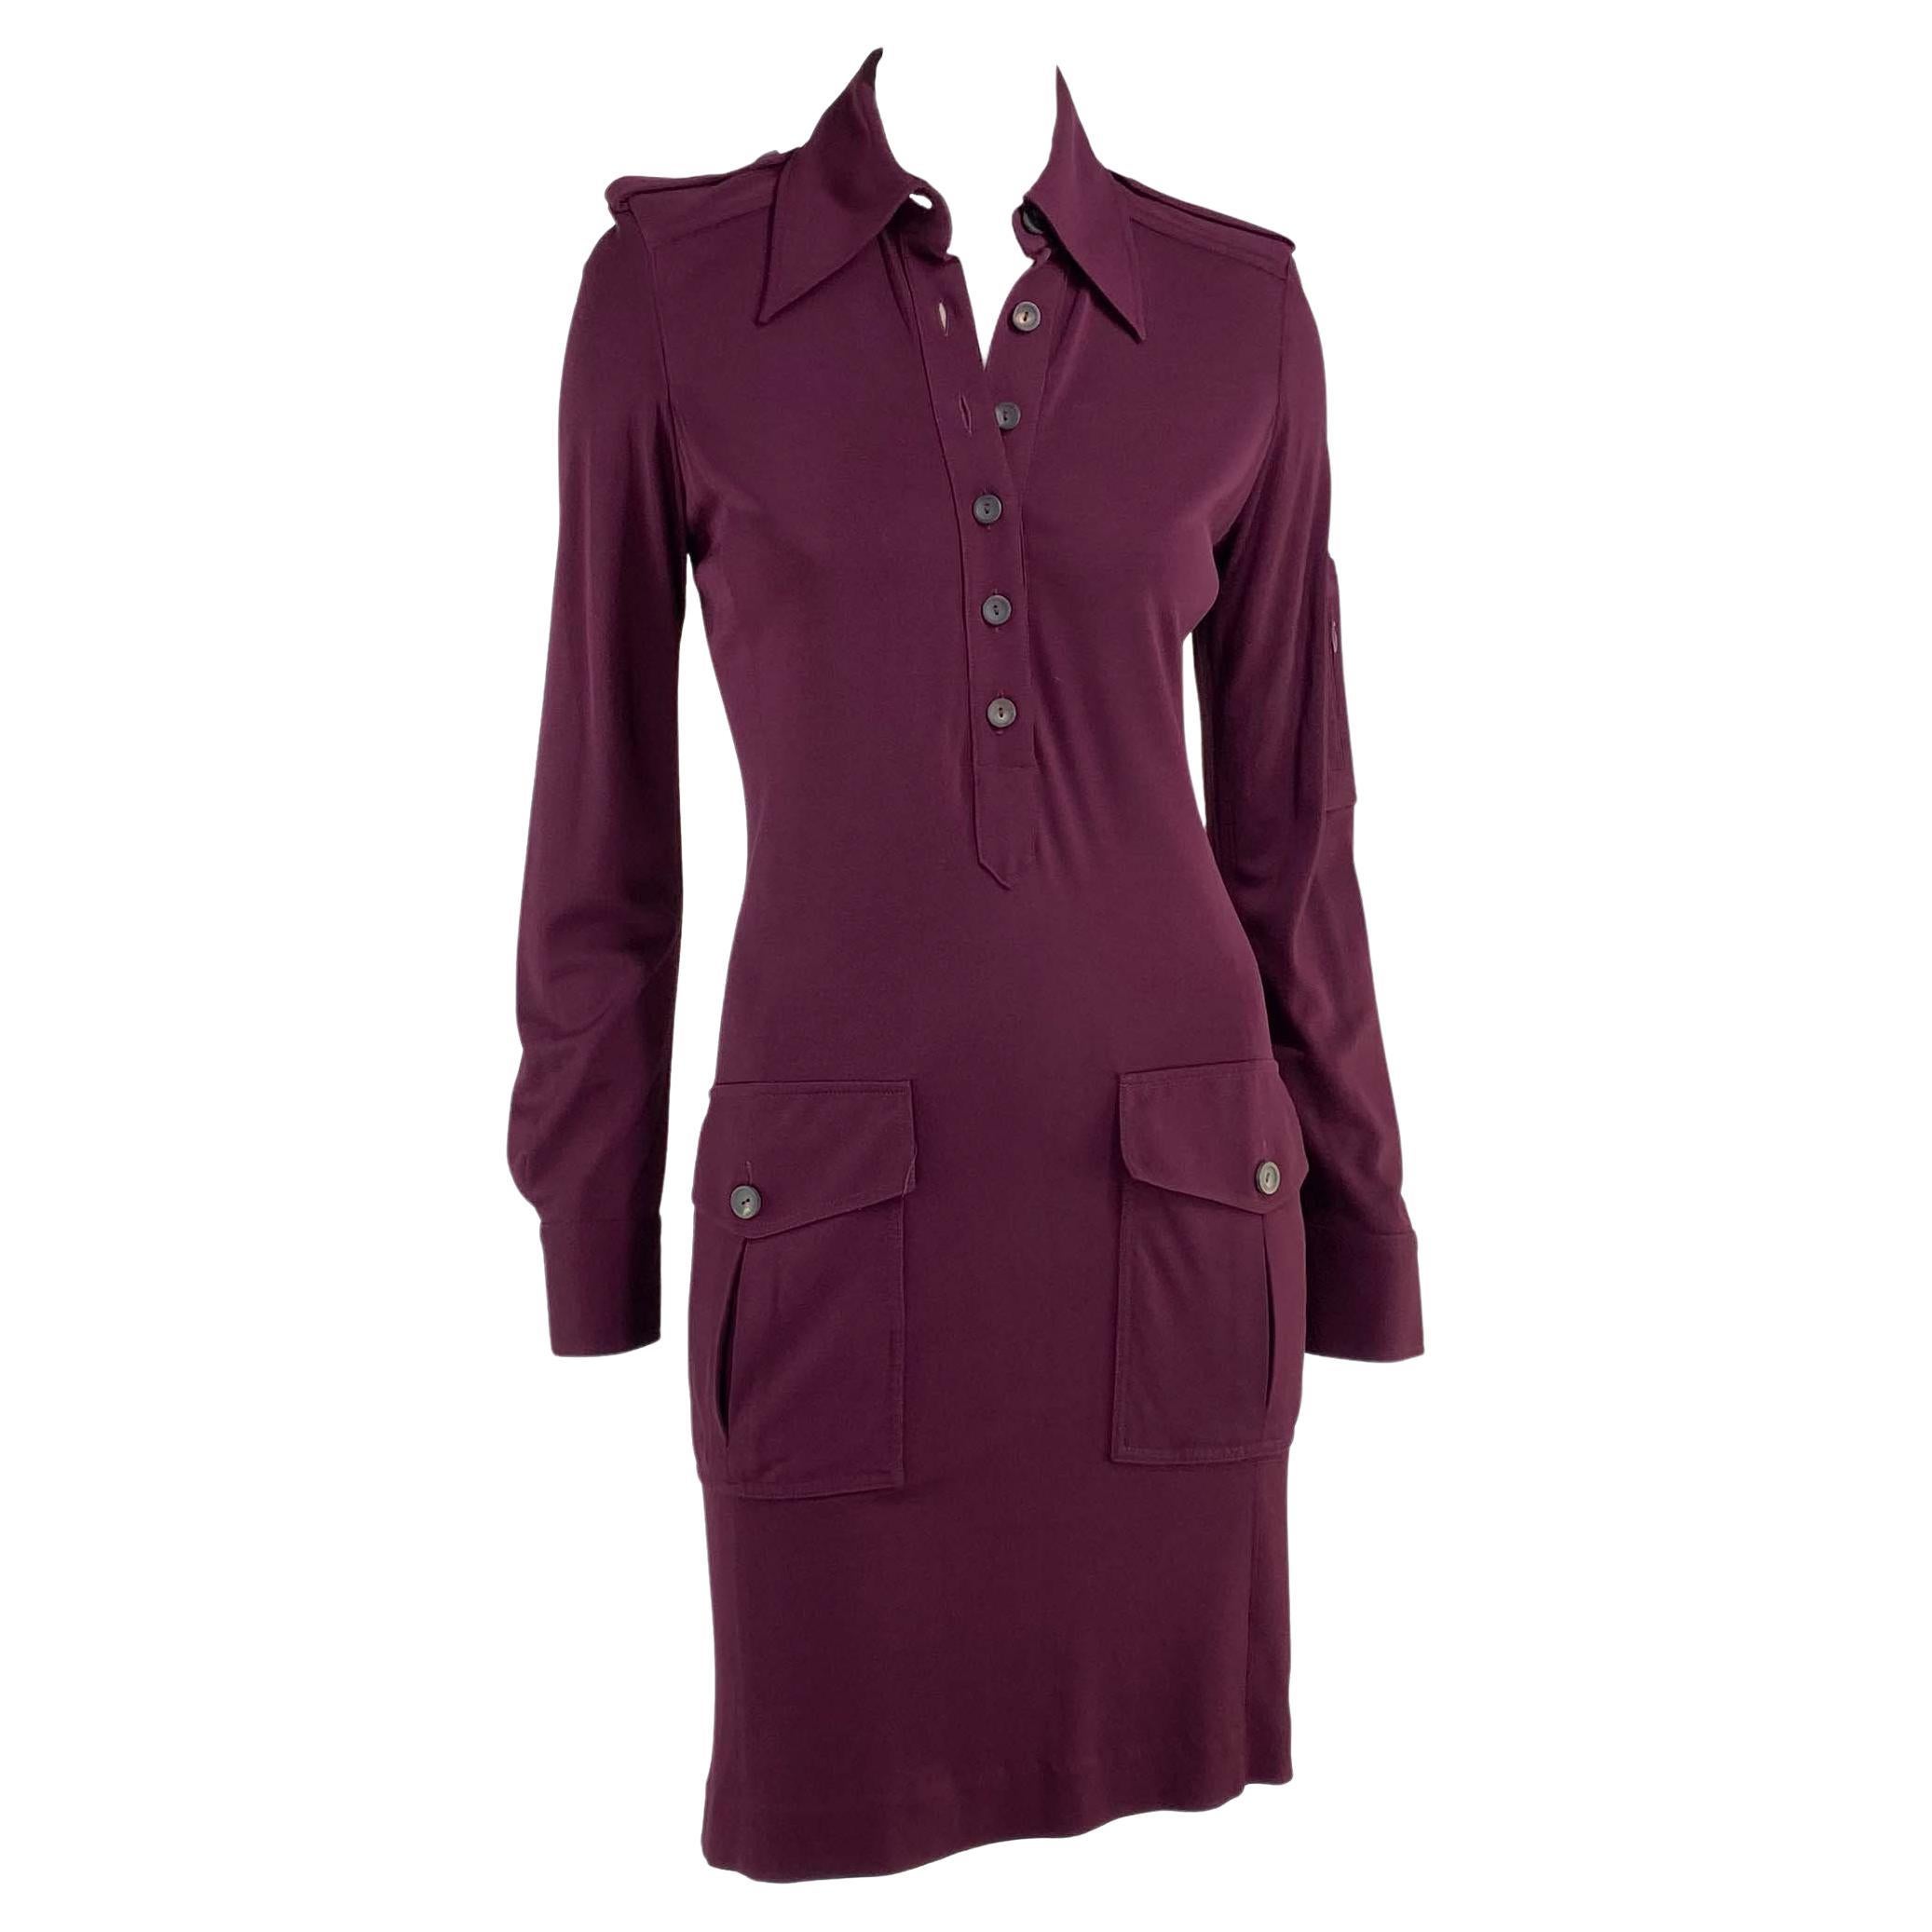 F/W 1996 Gucci by Tom Ford Burgundy Military Inspired Button Up Pocket Dress (Robe à poches boutonnées d'inspiration militaire) en vente